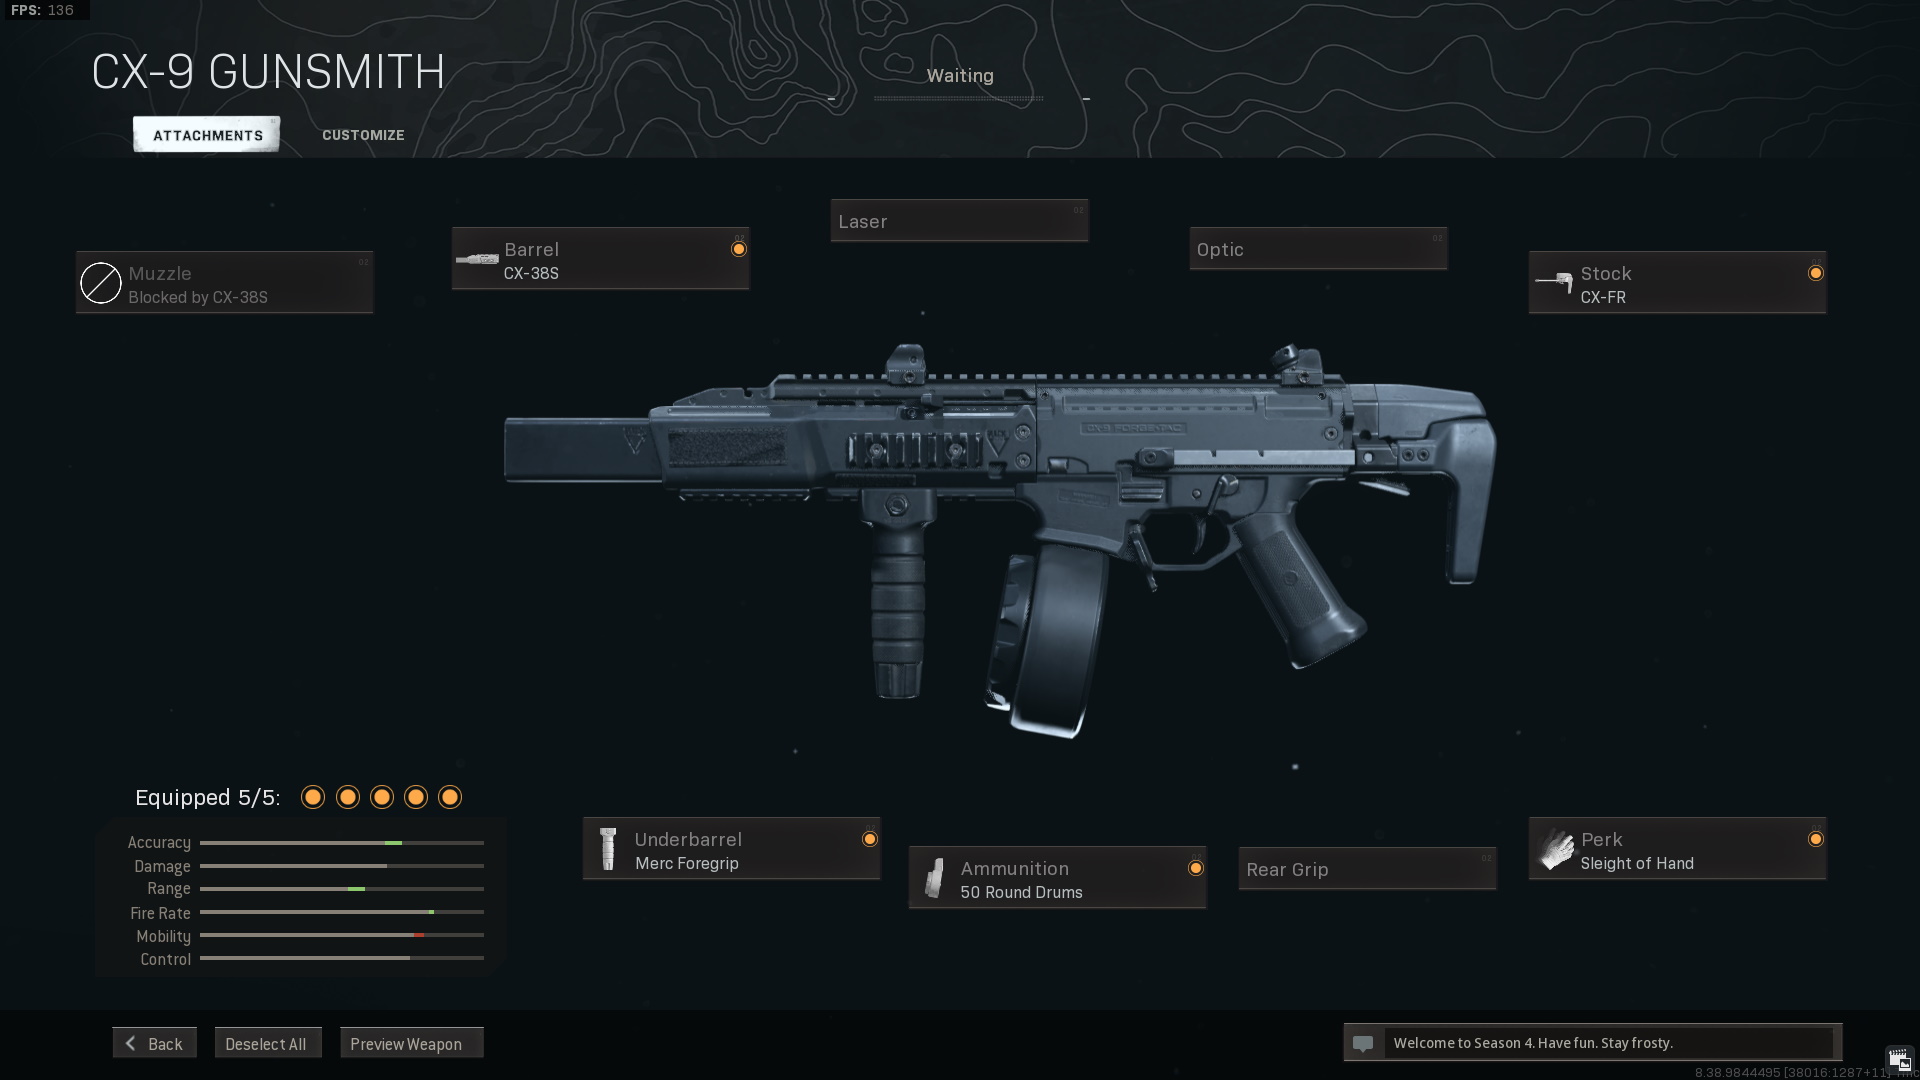 This Warzone CX-9 smg has the following attachments: CX-38S, CX-FR, Merc Foregrip, 50 Round Drums, Sleight of Hand